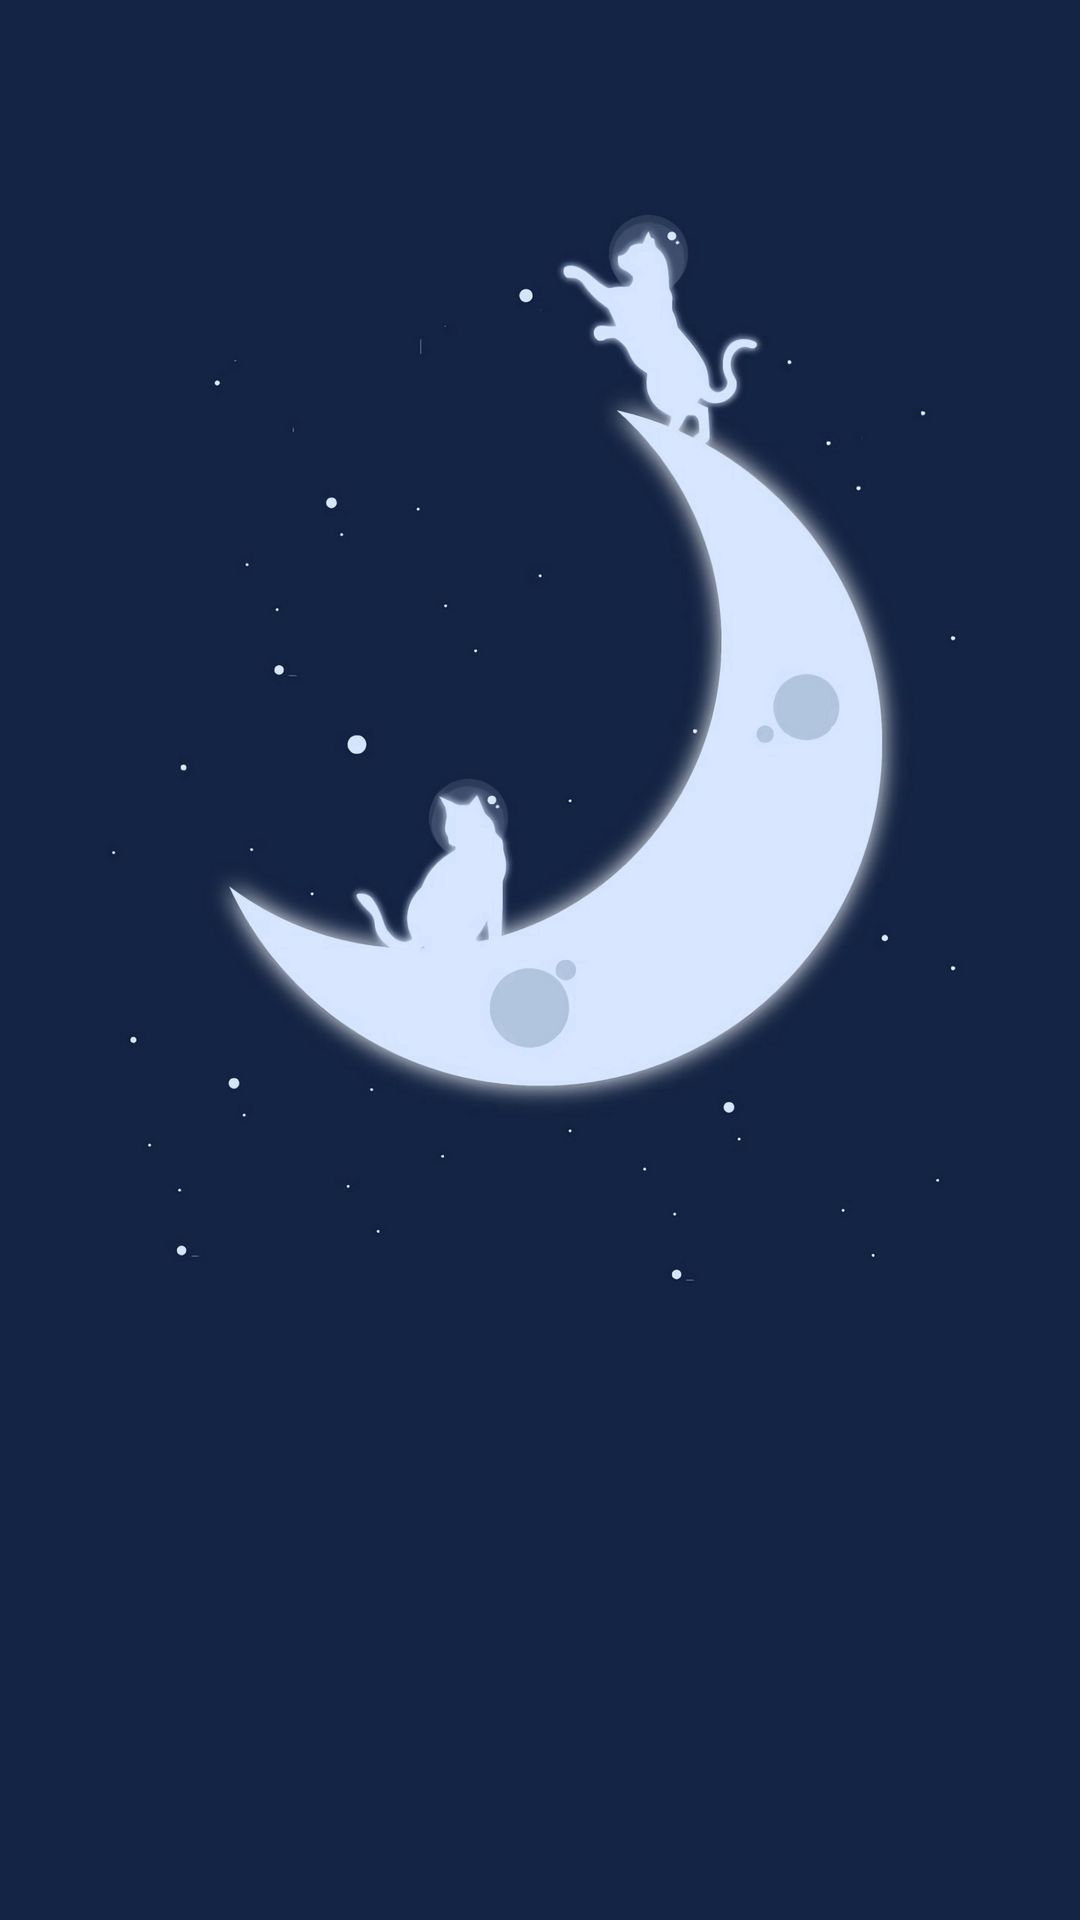 A cat is sitting on the moon - Galaxy, moon